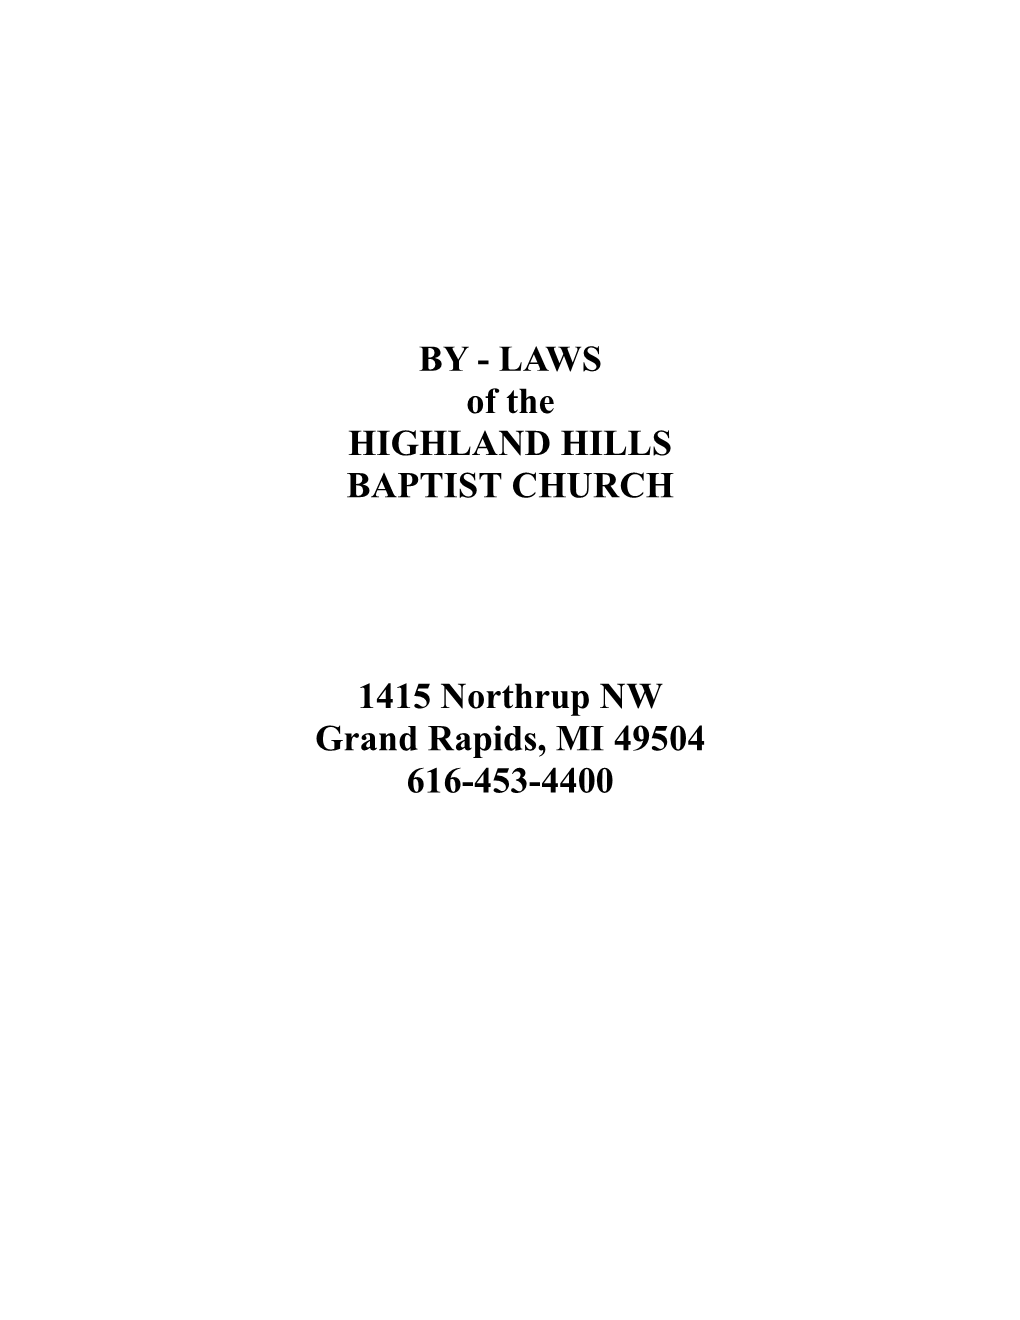 BY - LAWS of the HIGHLAND HILLS BAPTIST CHURCH